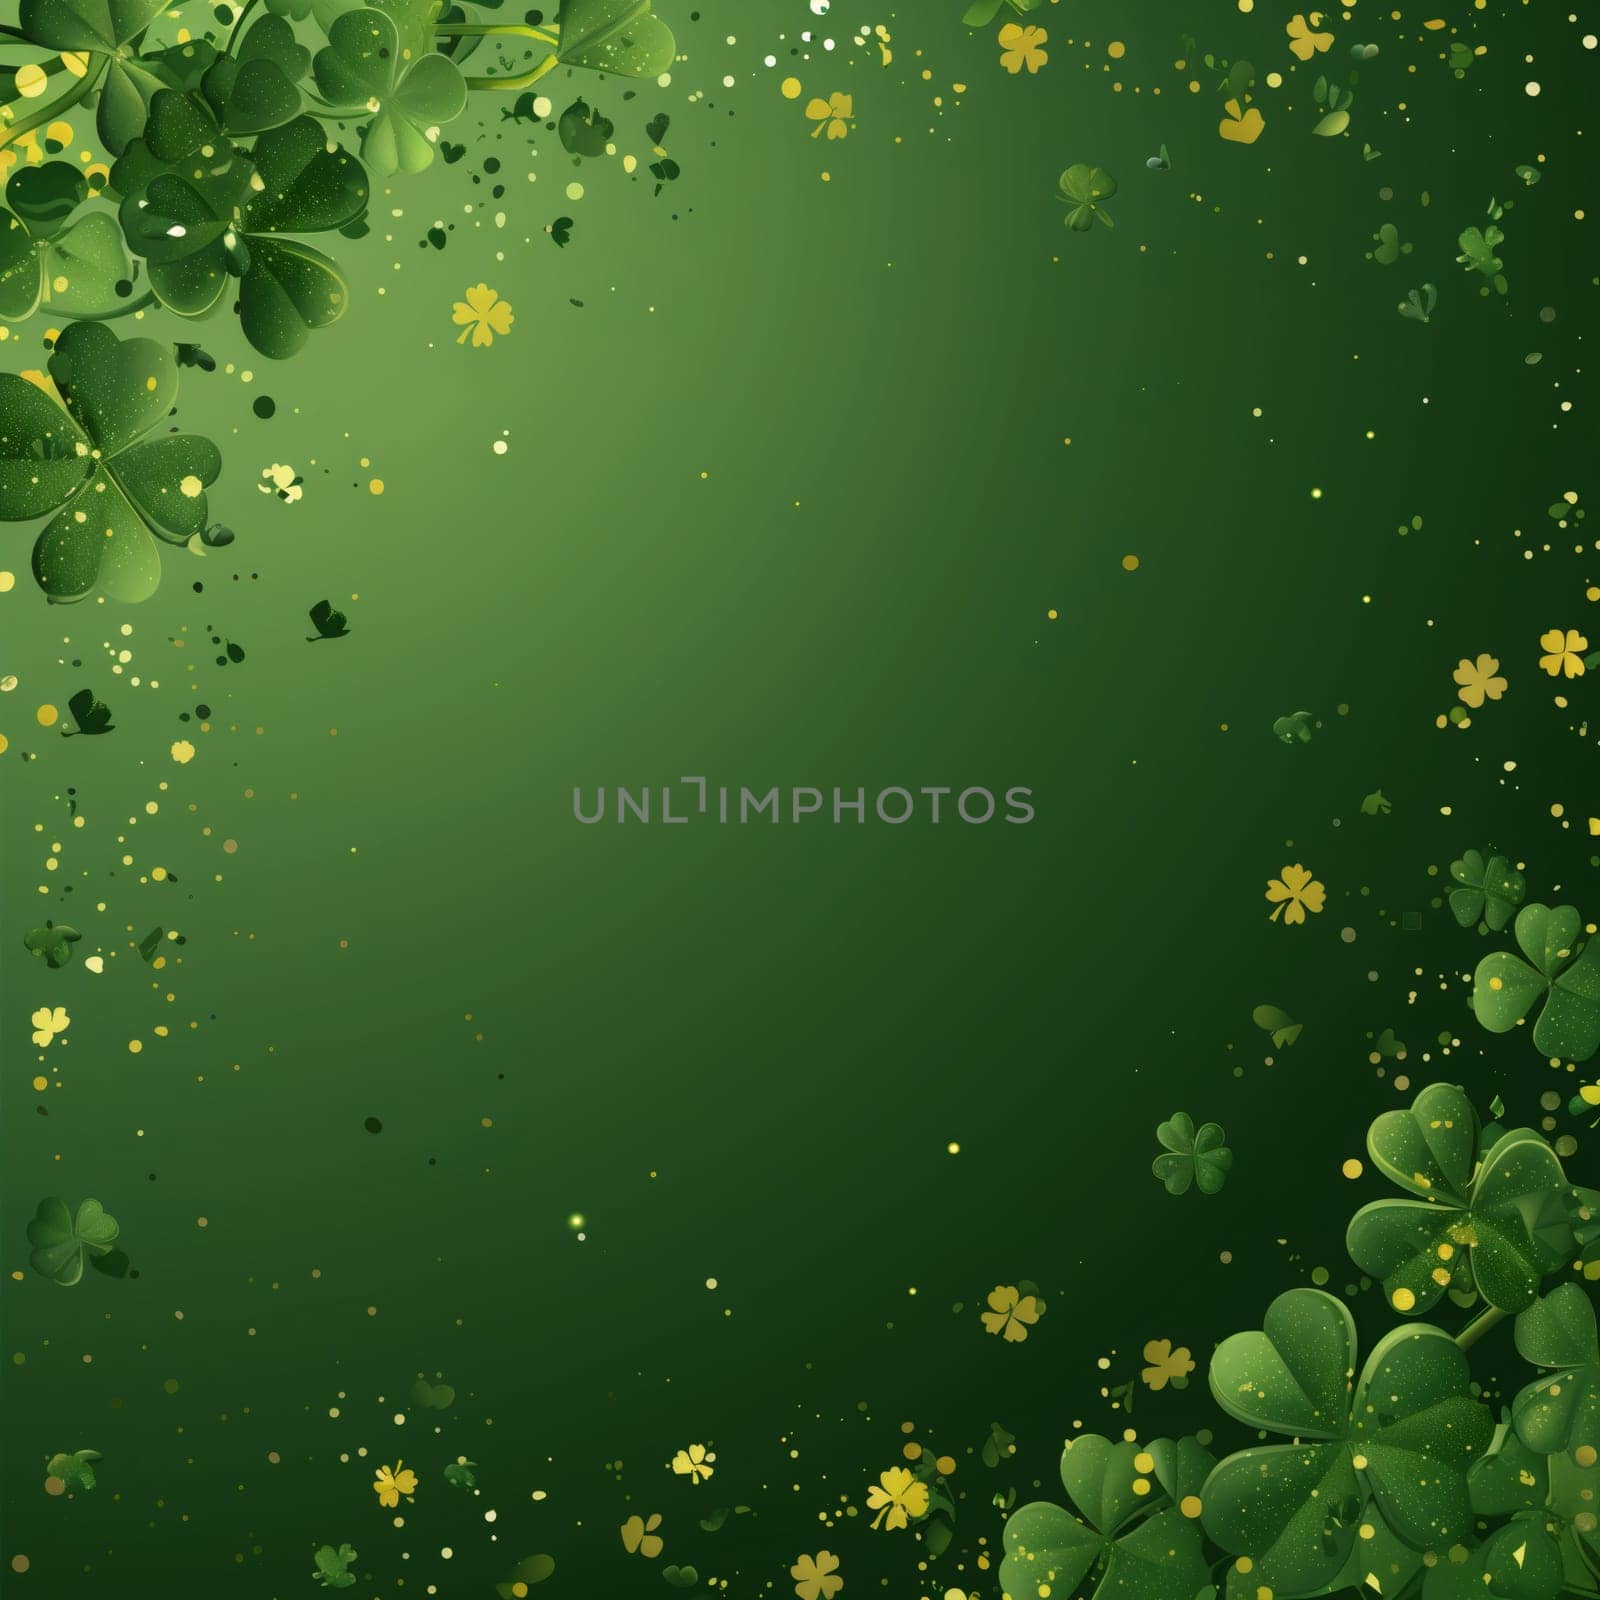 Beautiful delicate background of falling 3D shamrock leaves on a green background with copy space in the center, flat lay close-up.